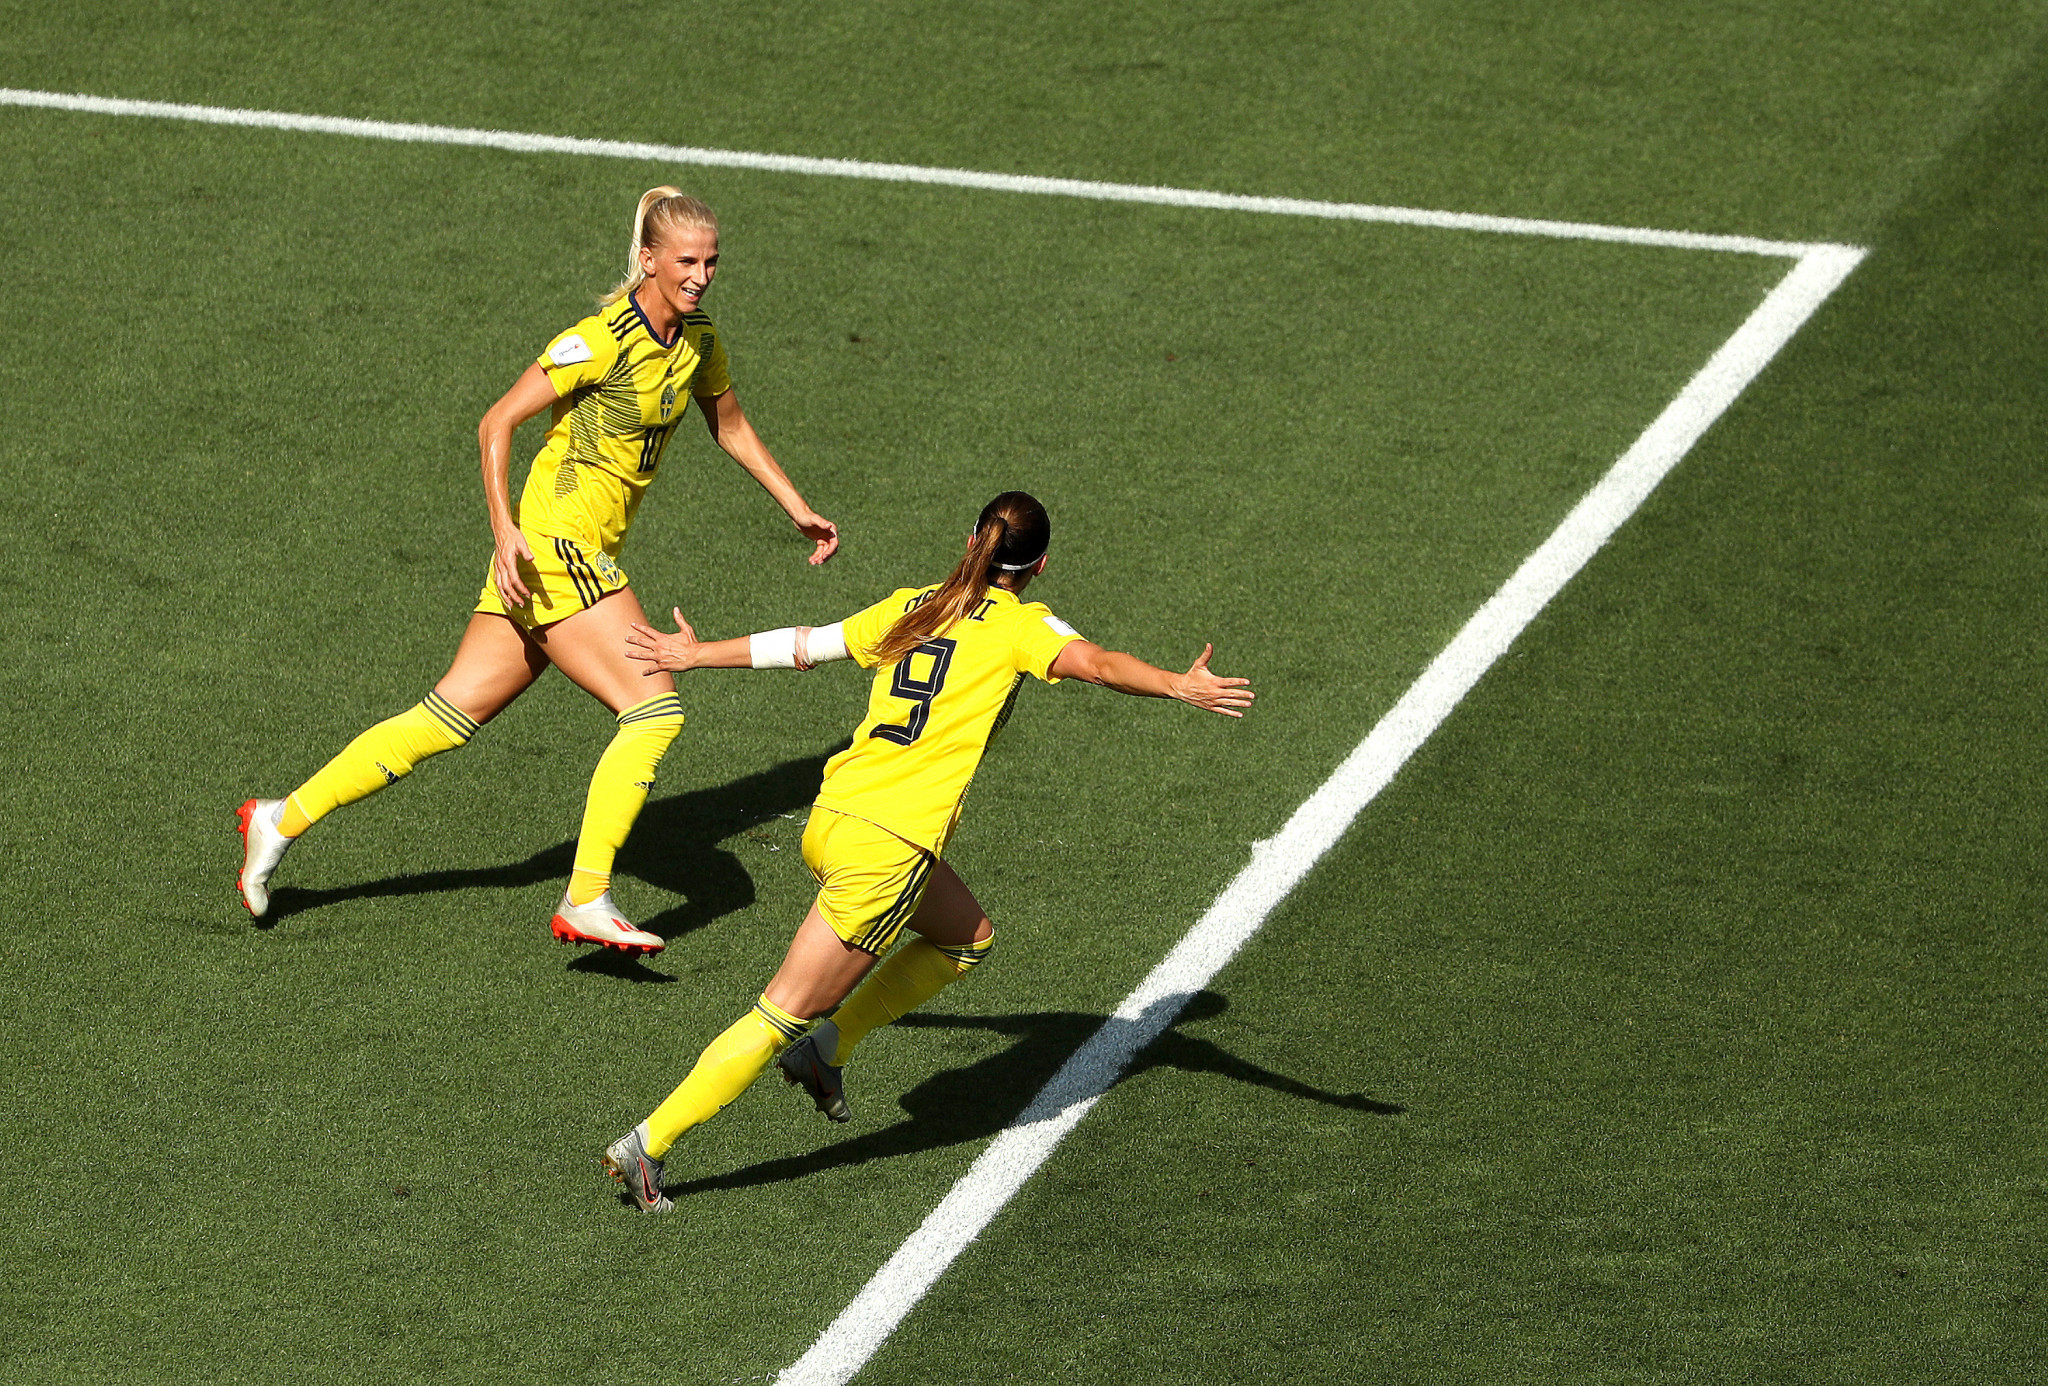 Kosovare Asllani opened the scoring for Sweden after a defensive mistake from England ©Getty Images